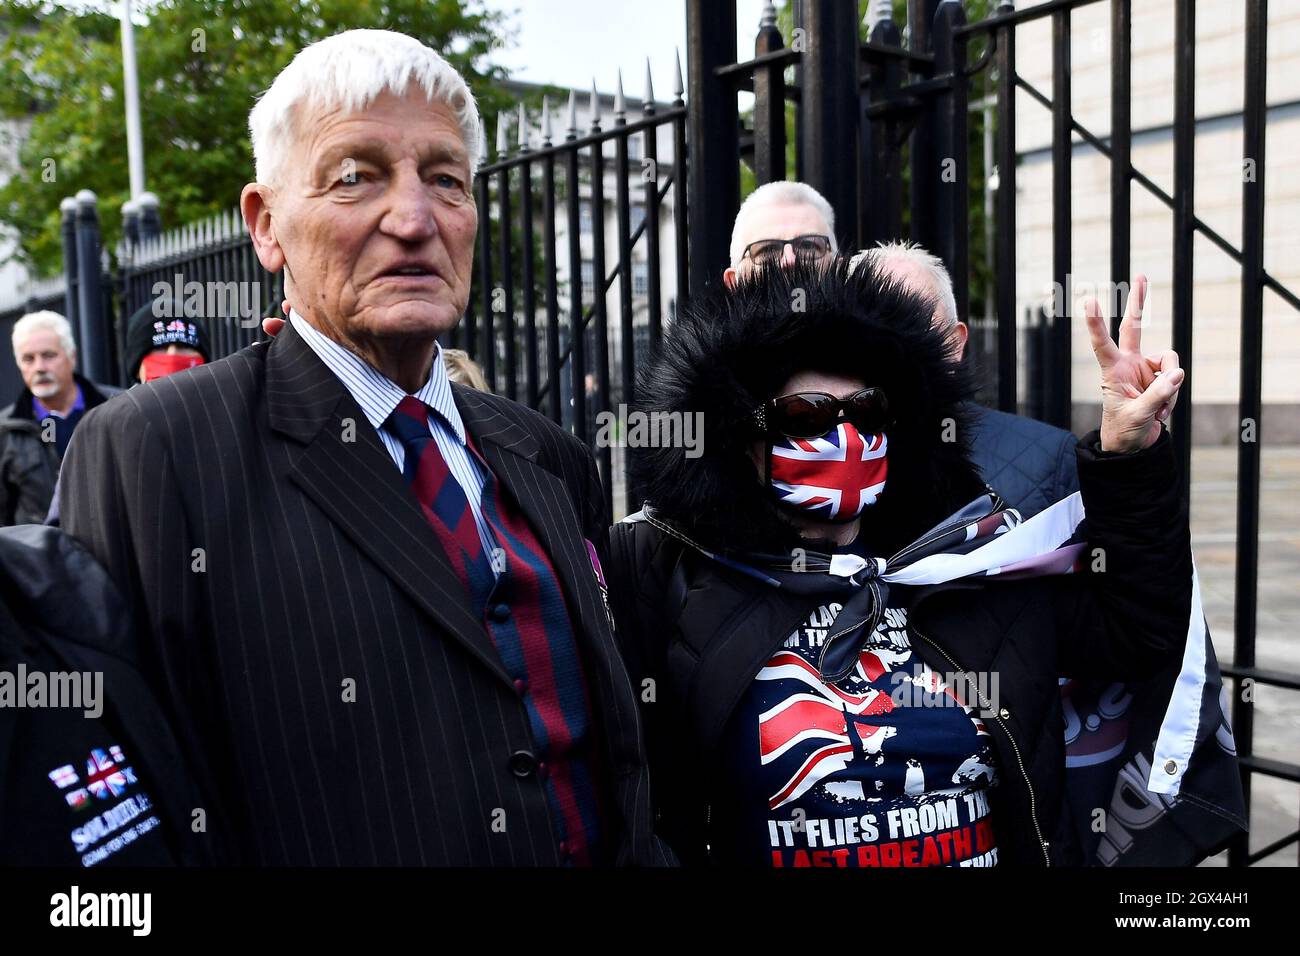 British Army veteran Dennis Hutchings poses with a supporter outside Laganside Courts as he arrives for his hearing for the 1974 Northern Ireland Troubles related death of John Pat Cunningham, in Belfast, Northern Ireland, October 4, 2021. REUTERS/Clodagh Kilcoyne Stock Photo